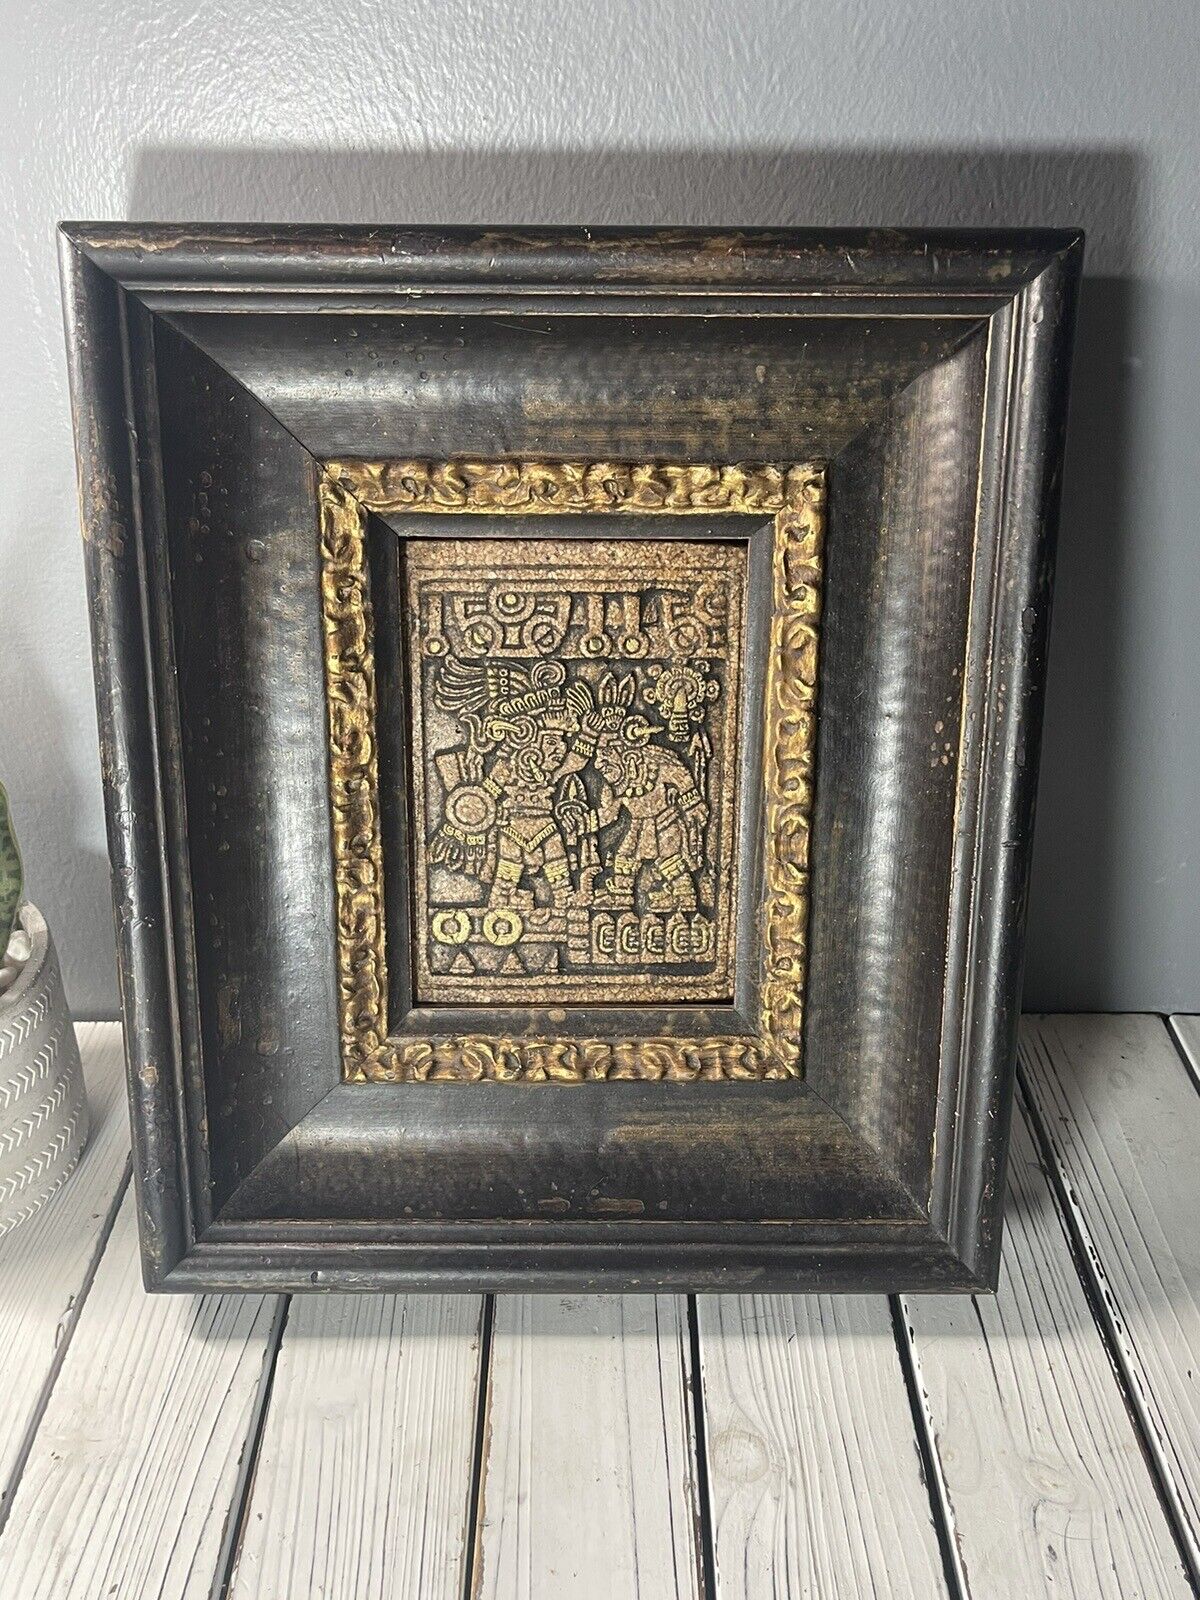 Mayan Aztec Native American Clay Stamp Tablet Art Framed Vintage Sarcophagus